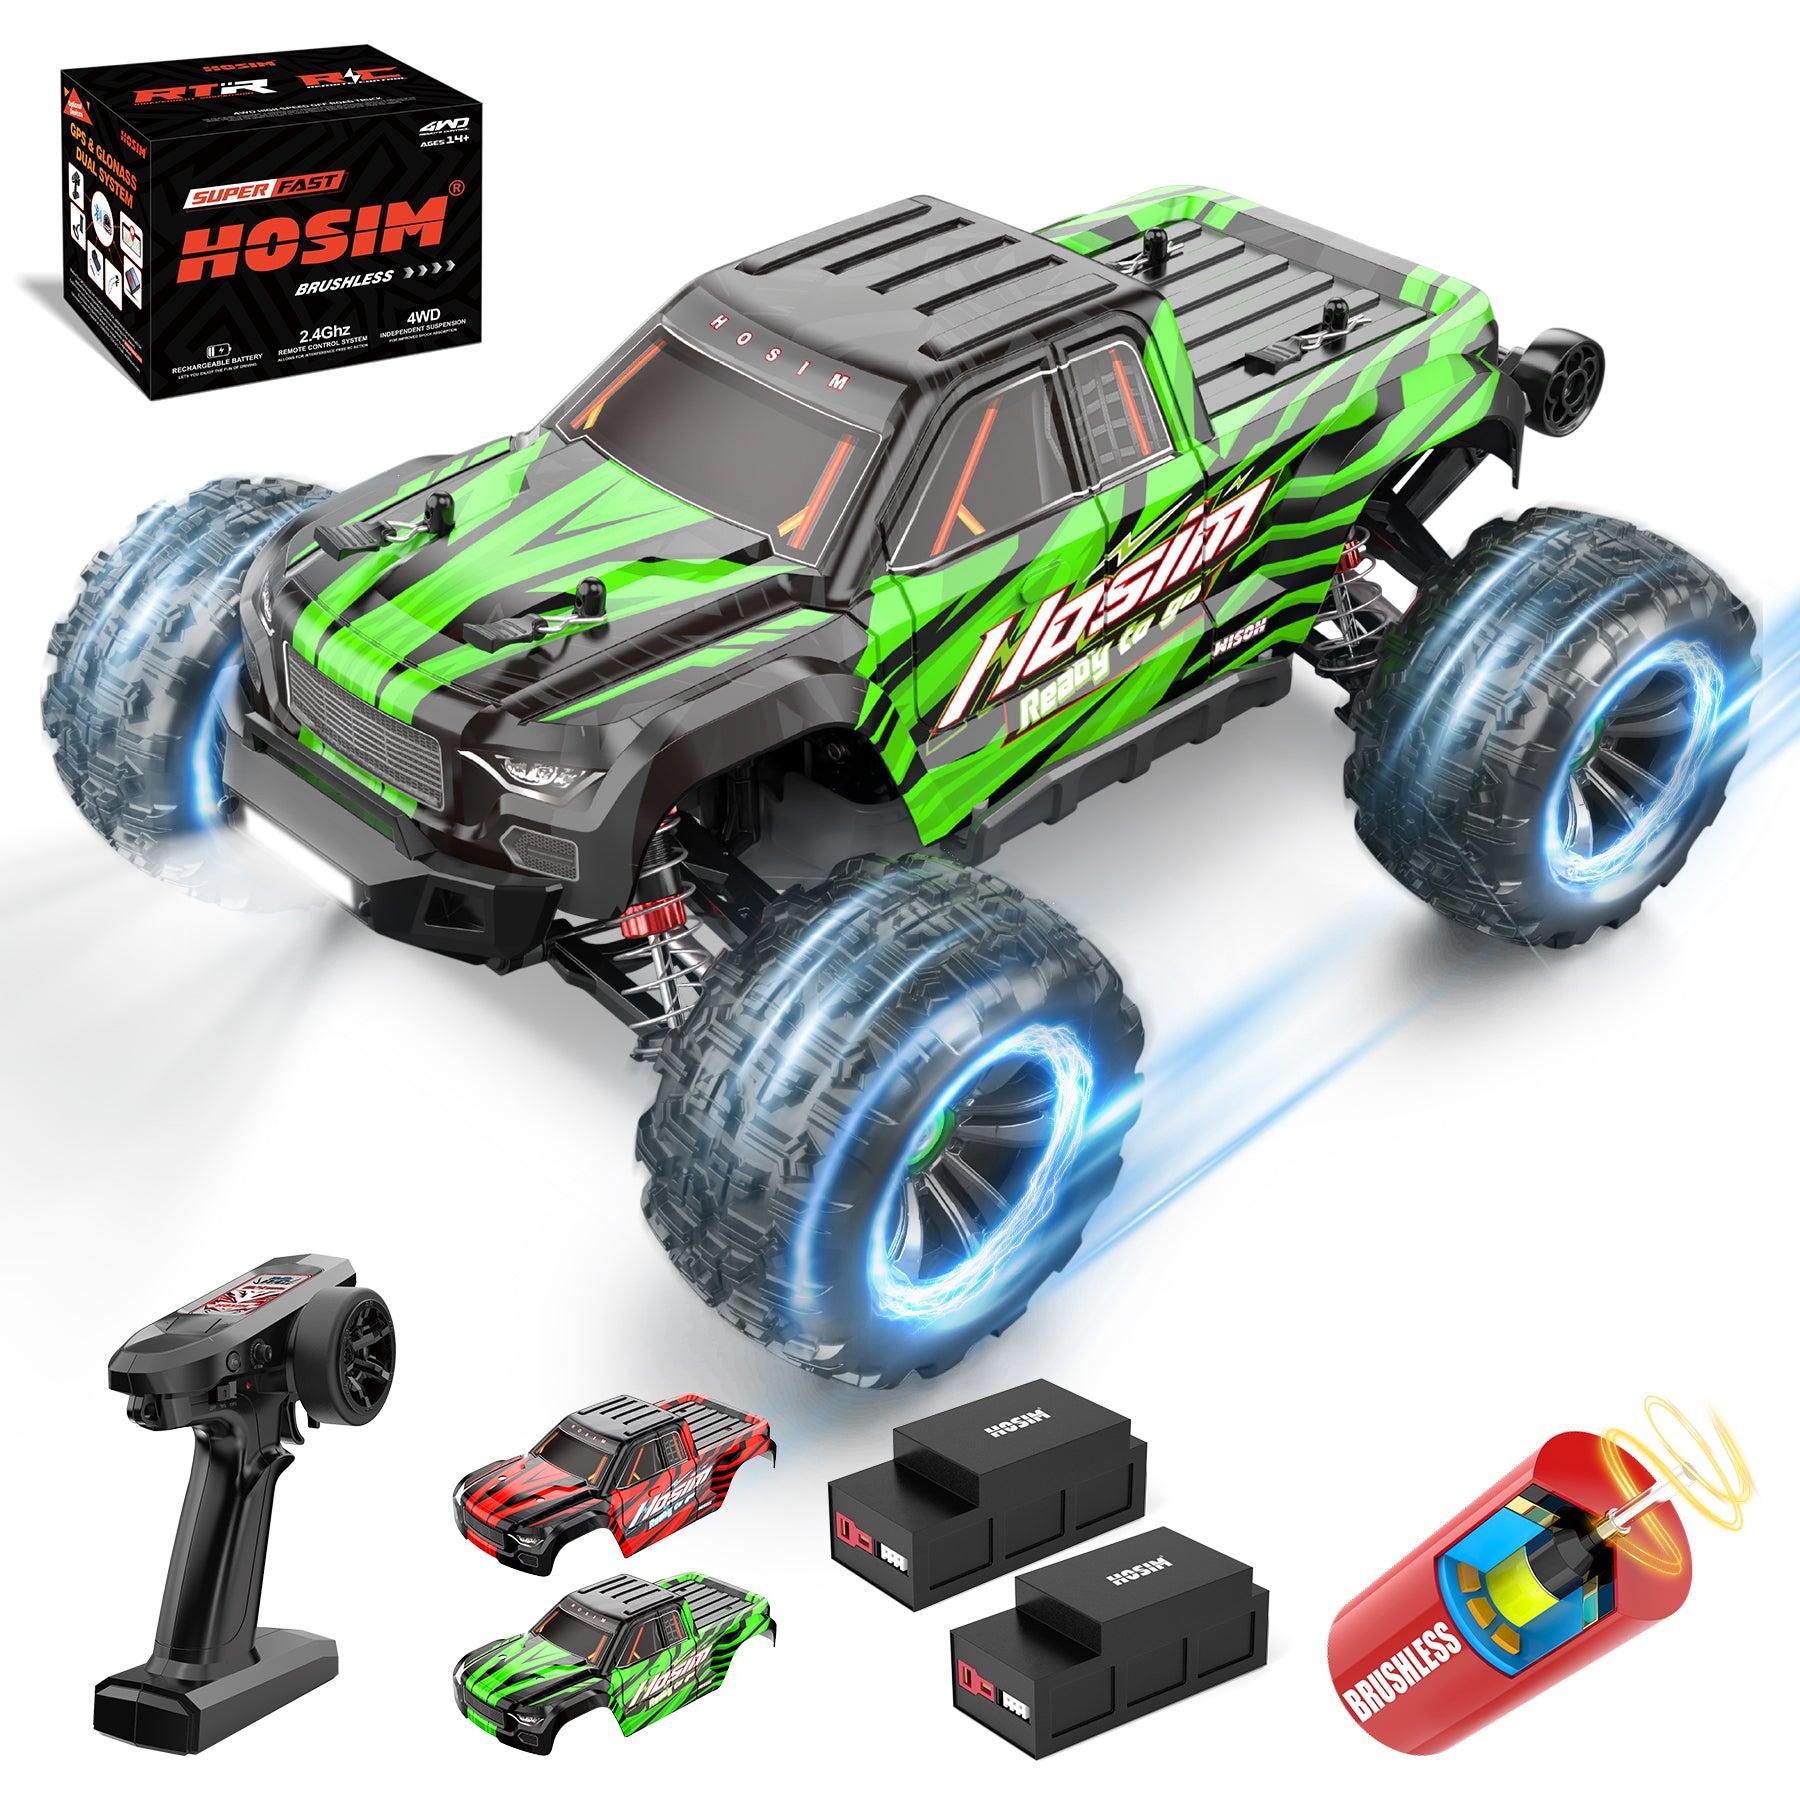 1/16 Rc Car: Upgrading Your 1/16 RC Car: Popular Options and Tips